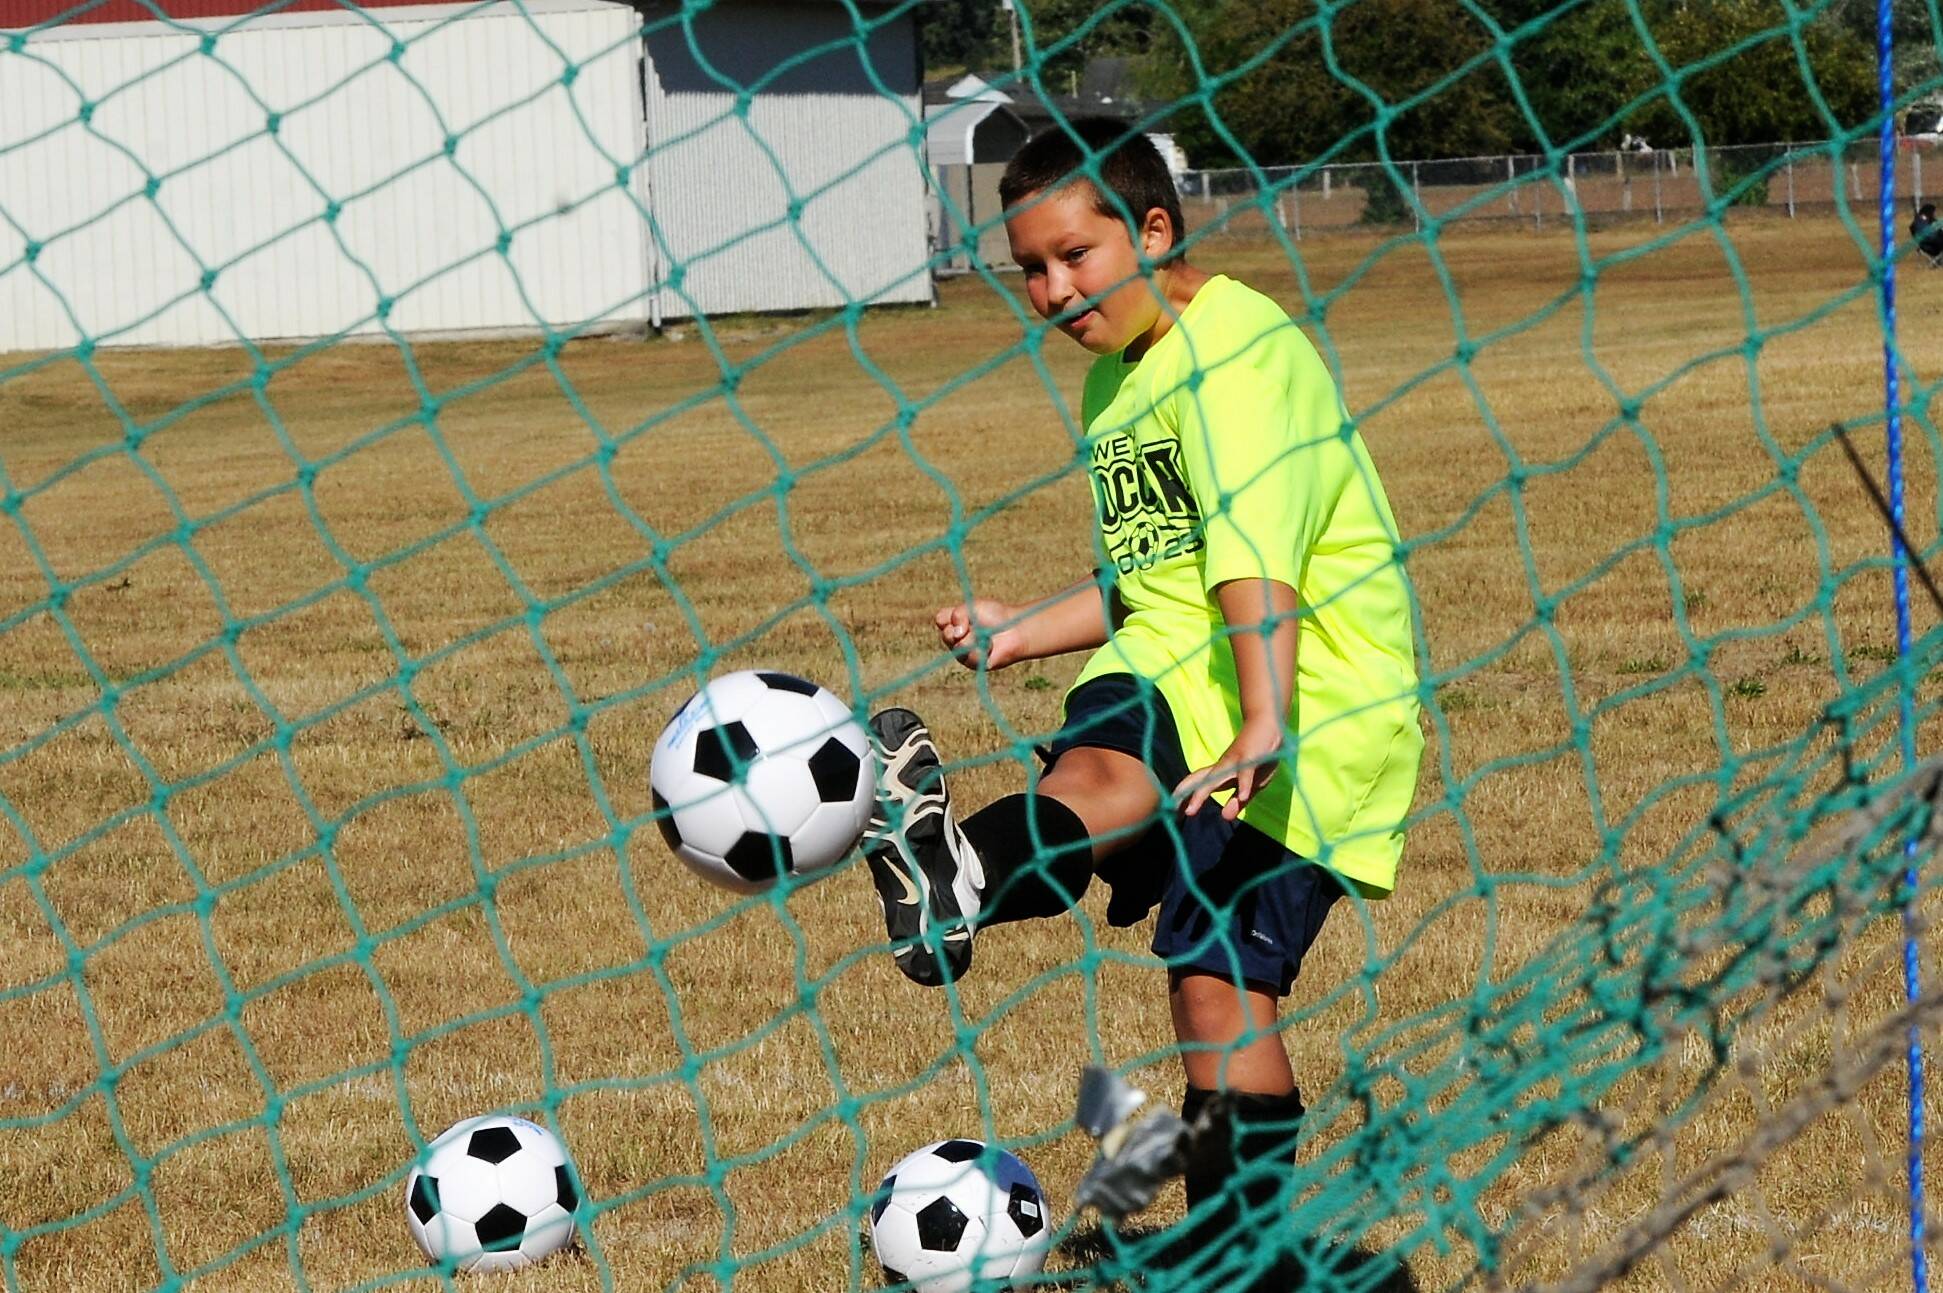 Danniel Price, age 8, with a kick into the net.